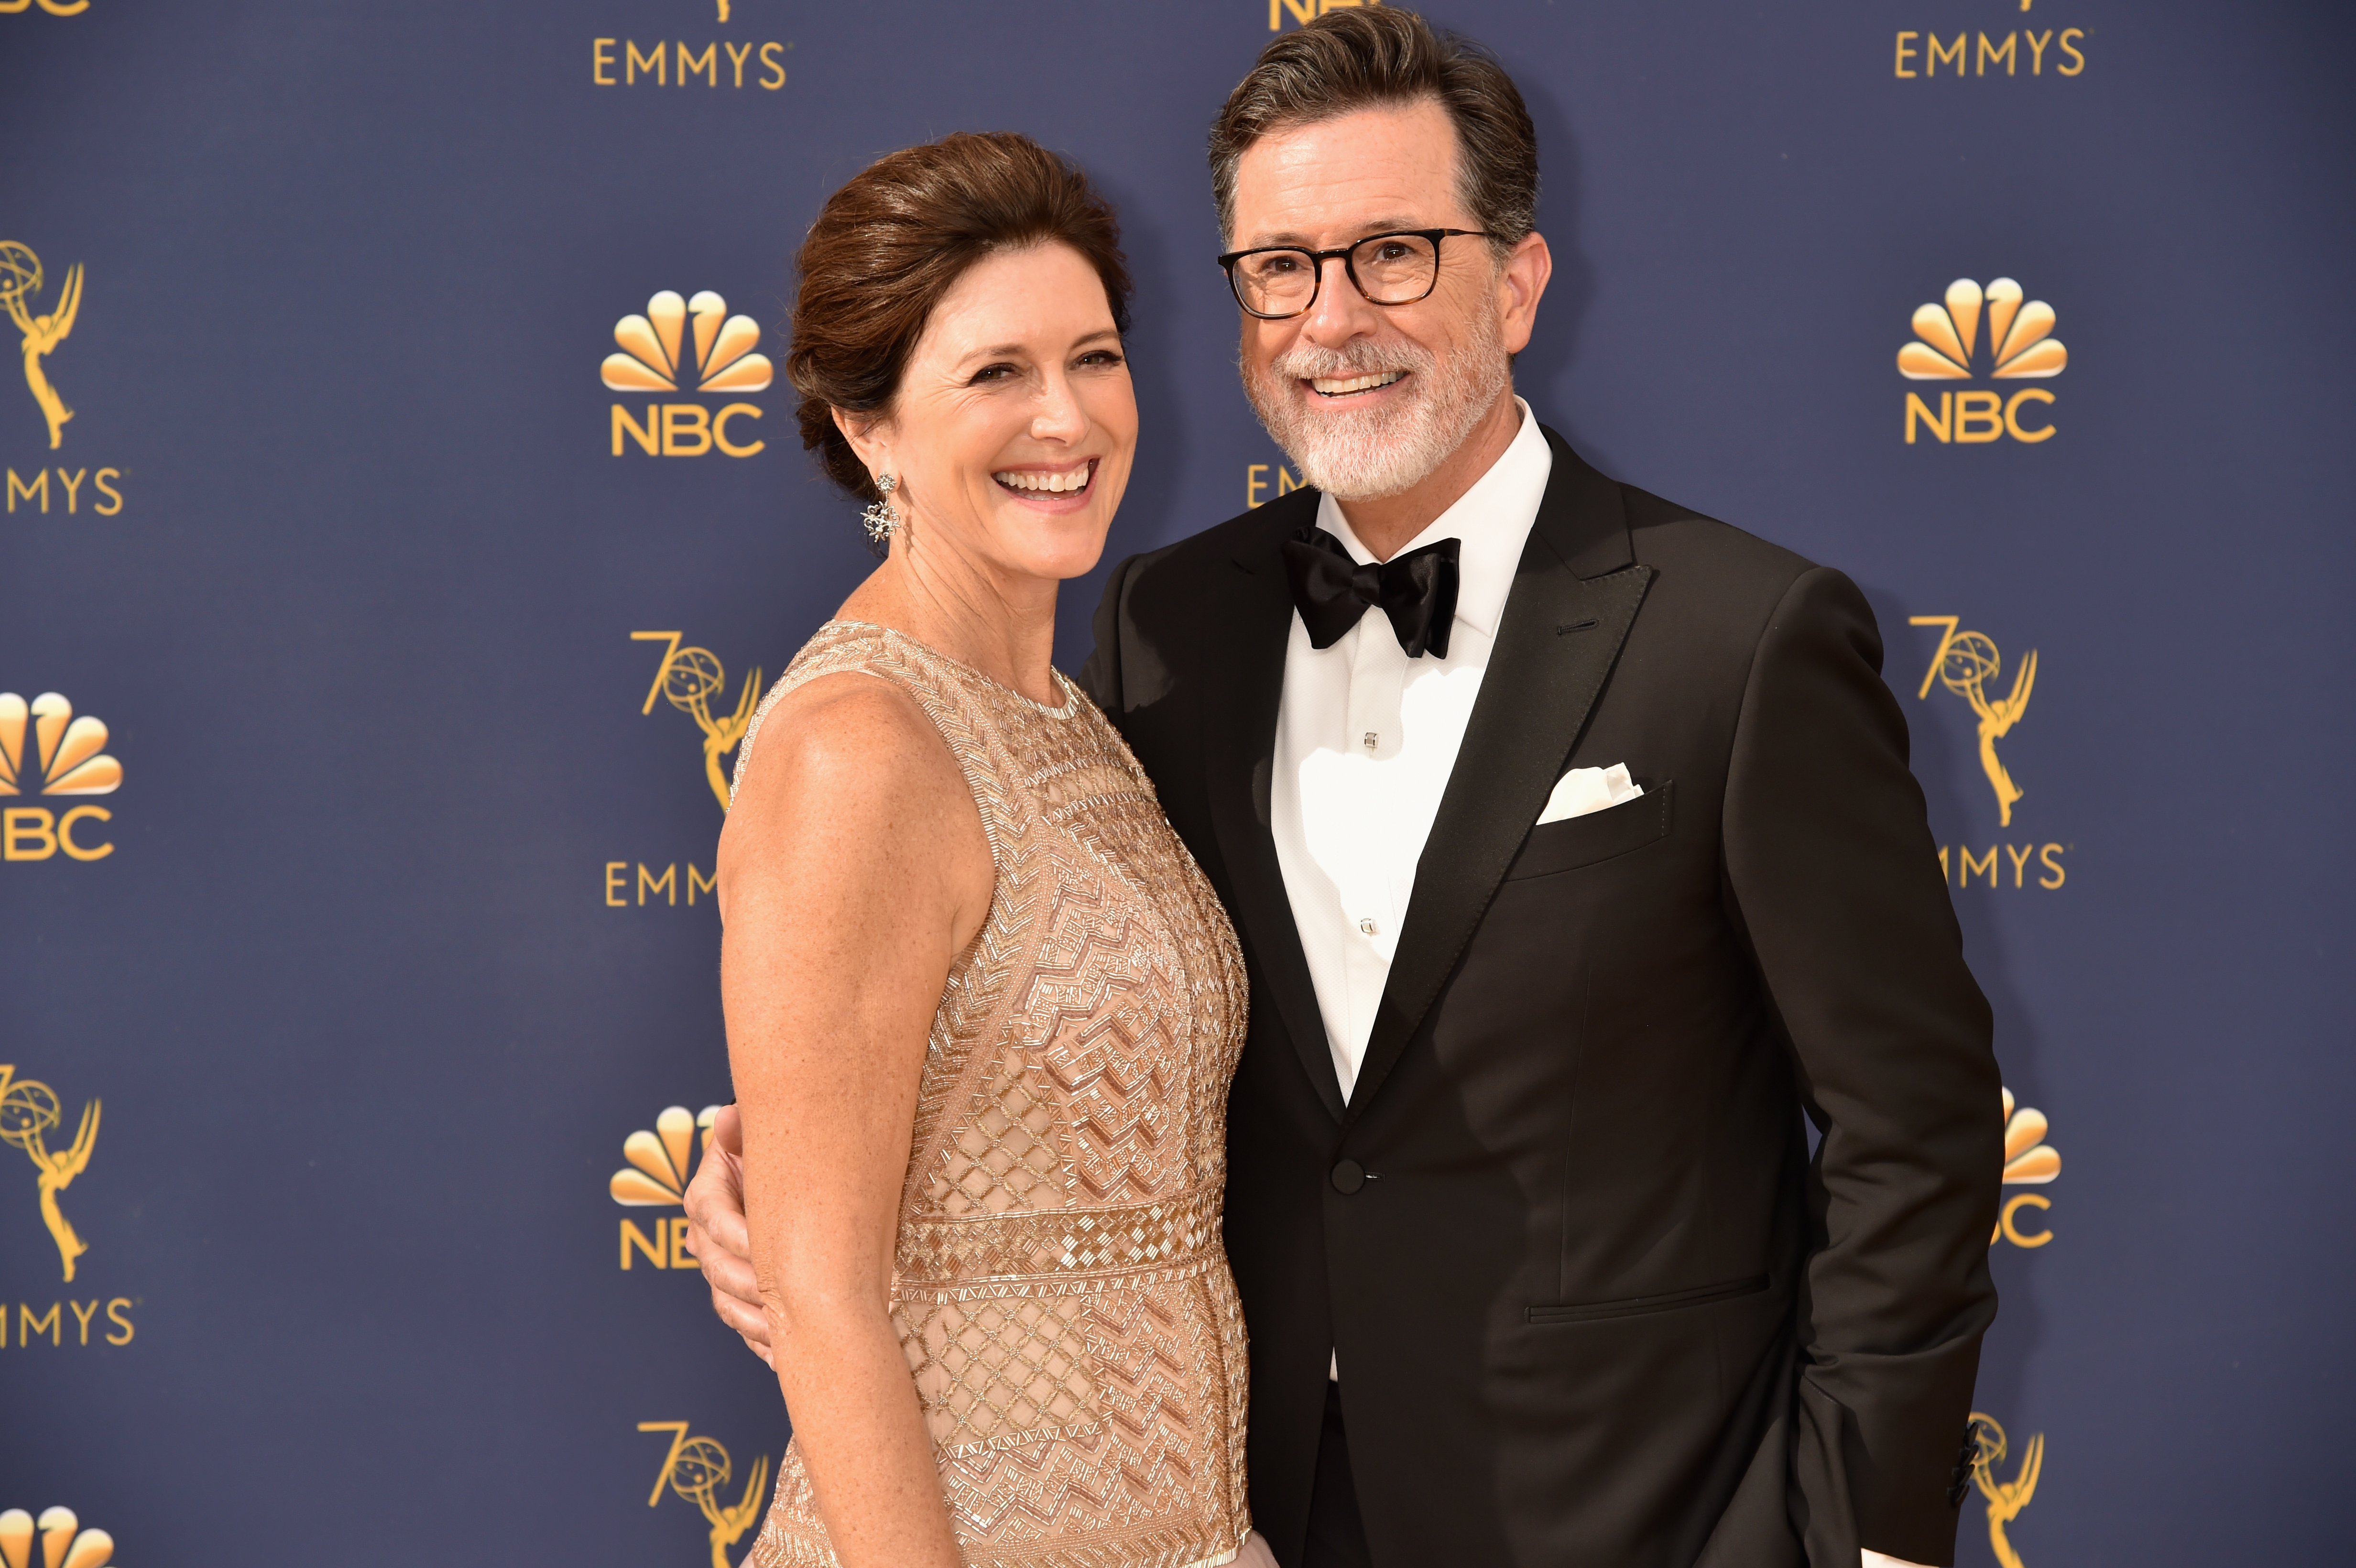 Stephen Colbert and Evelyn McGee-Colbert at the 70th Emmy Awards on September 17, 2018 | Source: Getty Images